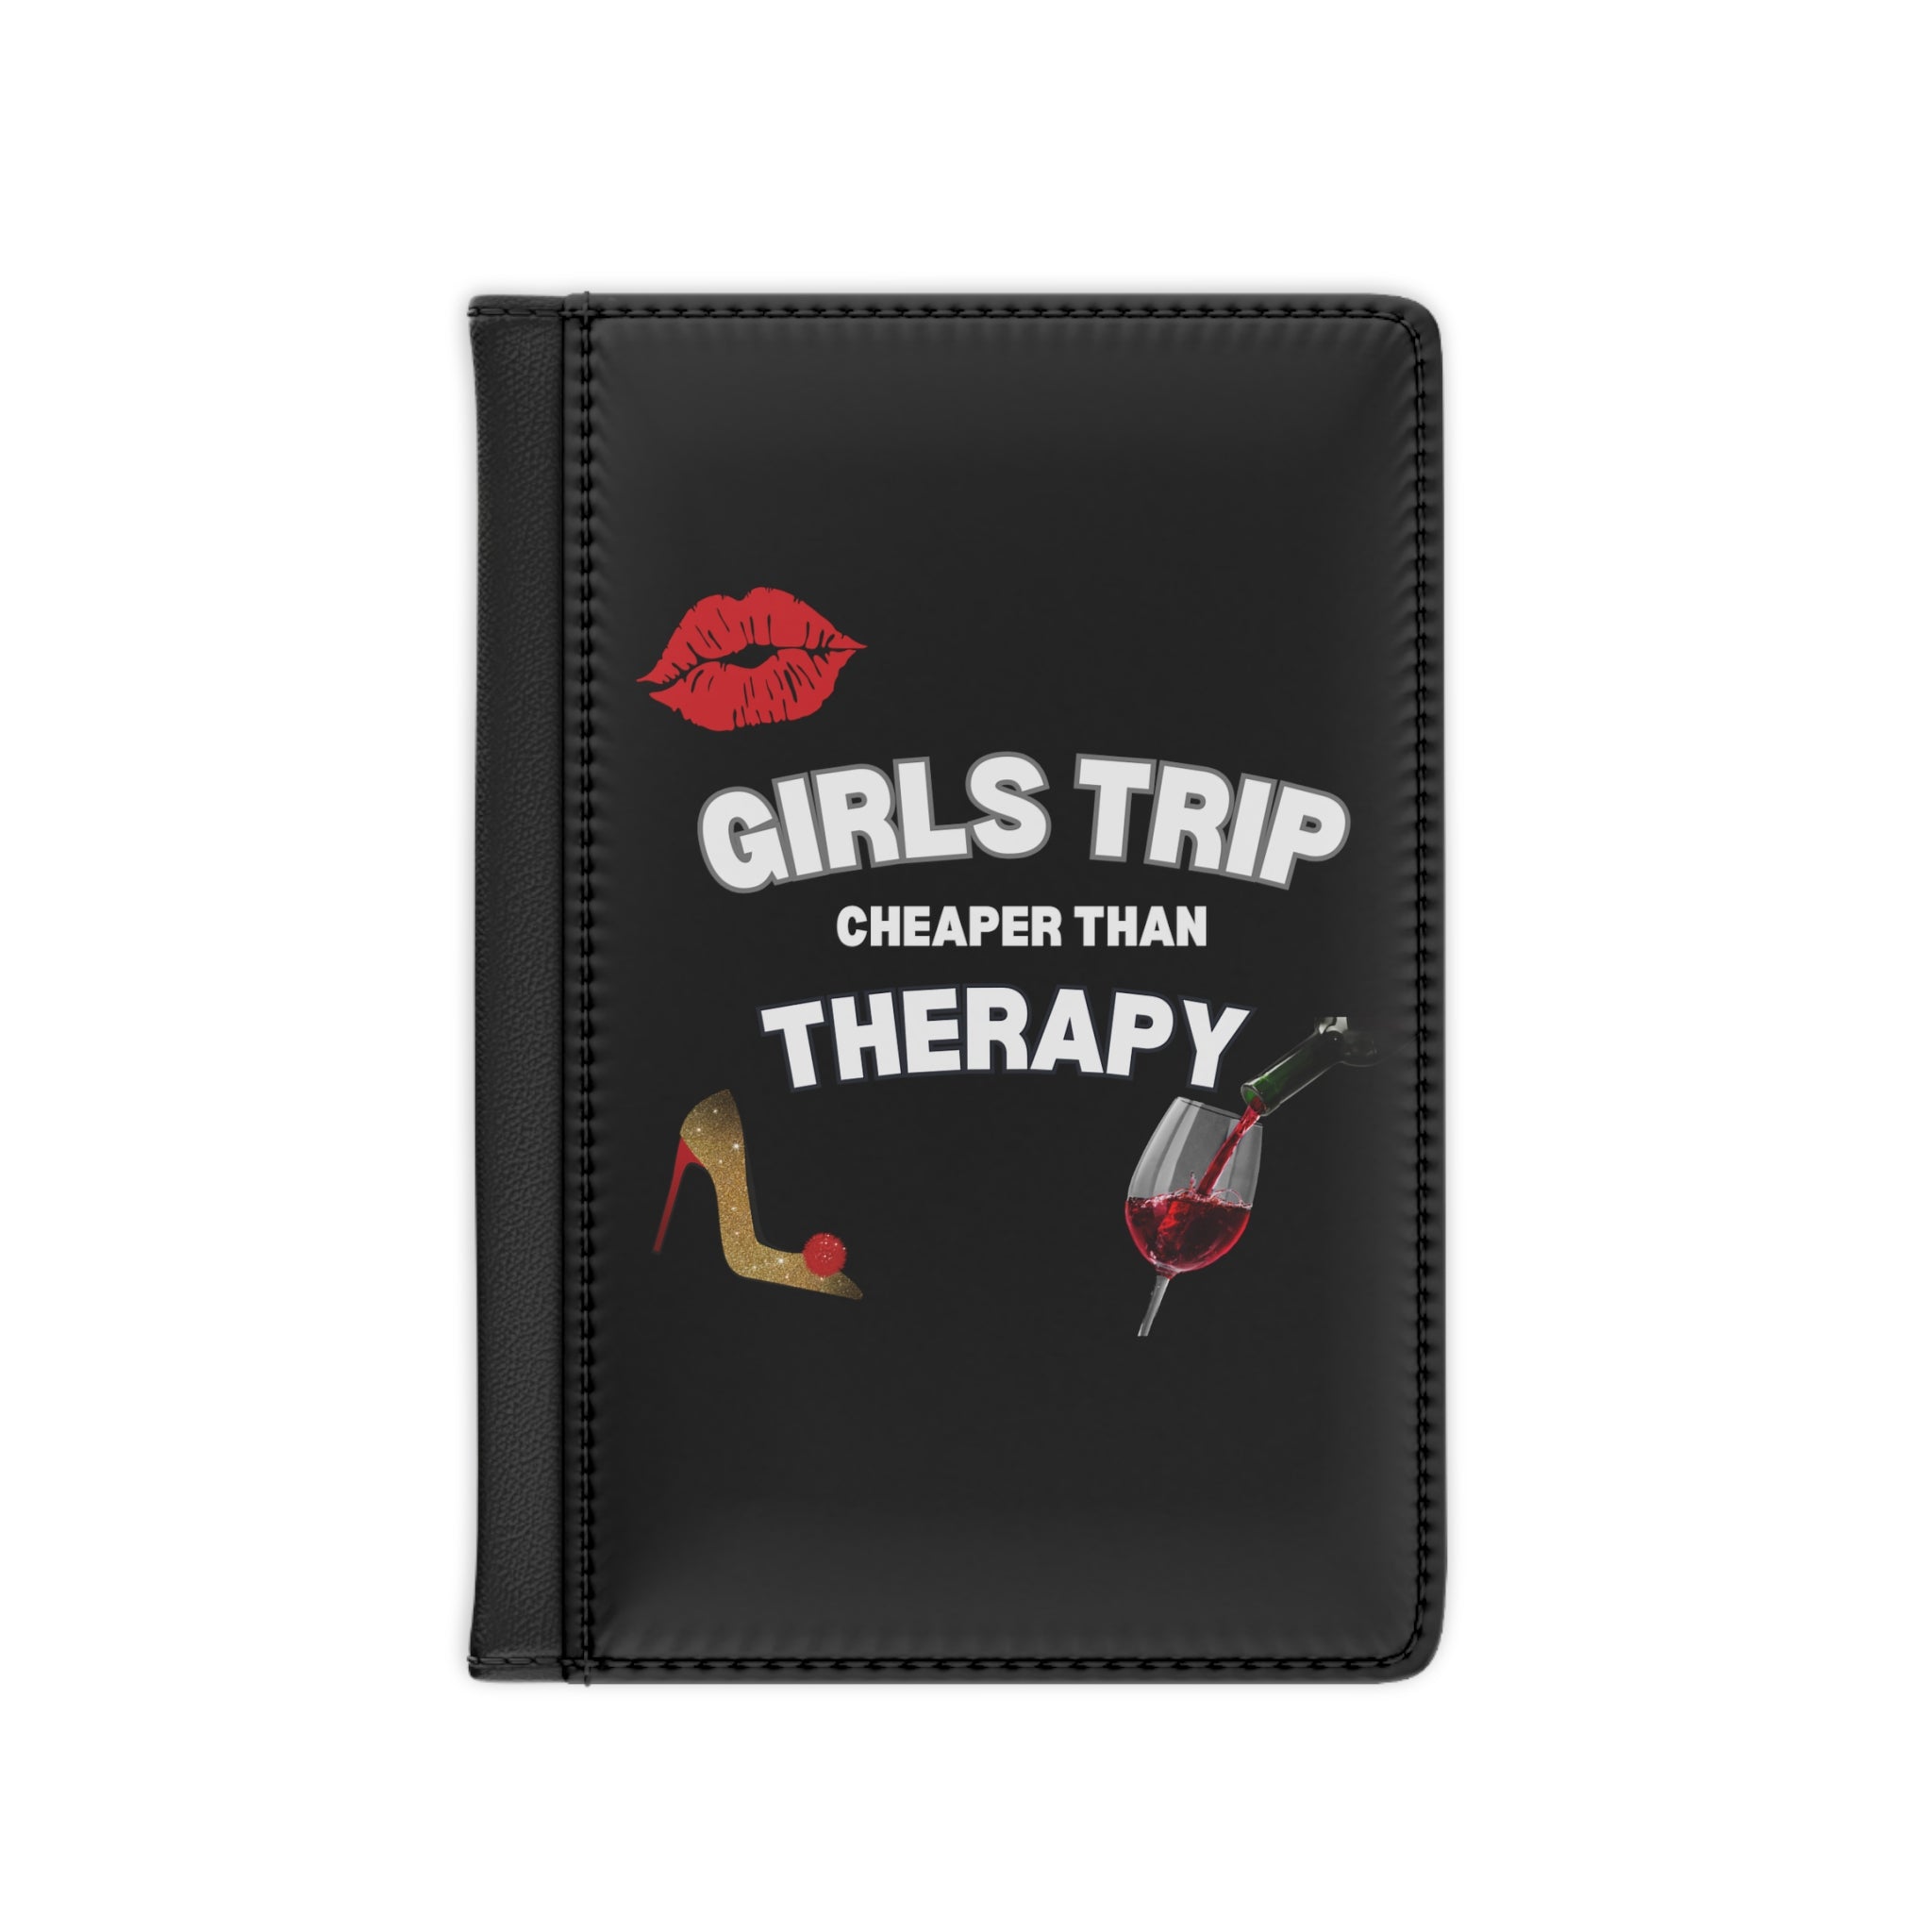 GIRLS TRIP CHEAPER THAN THERAPY PASSPORT COVER